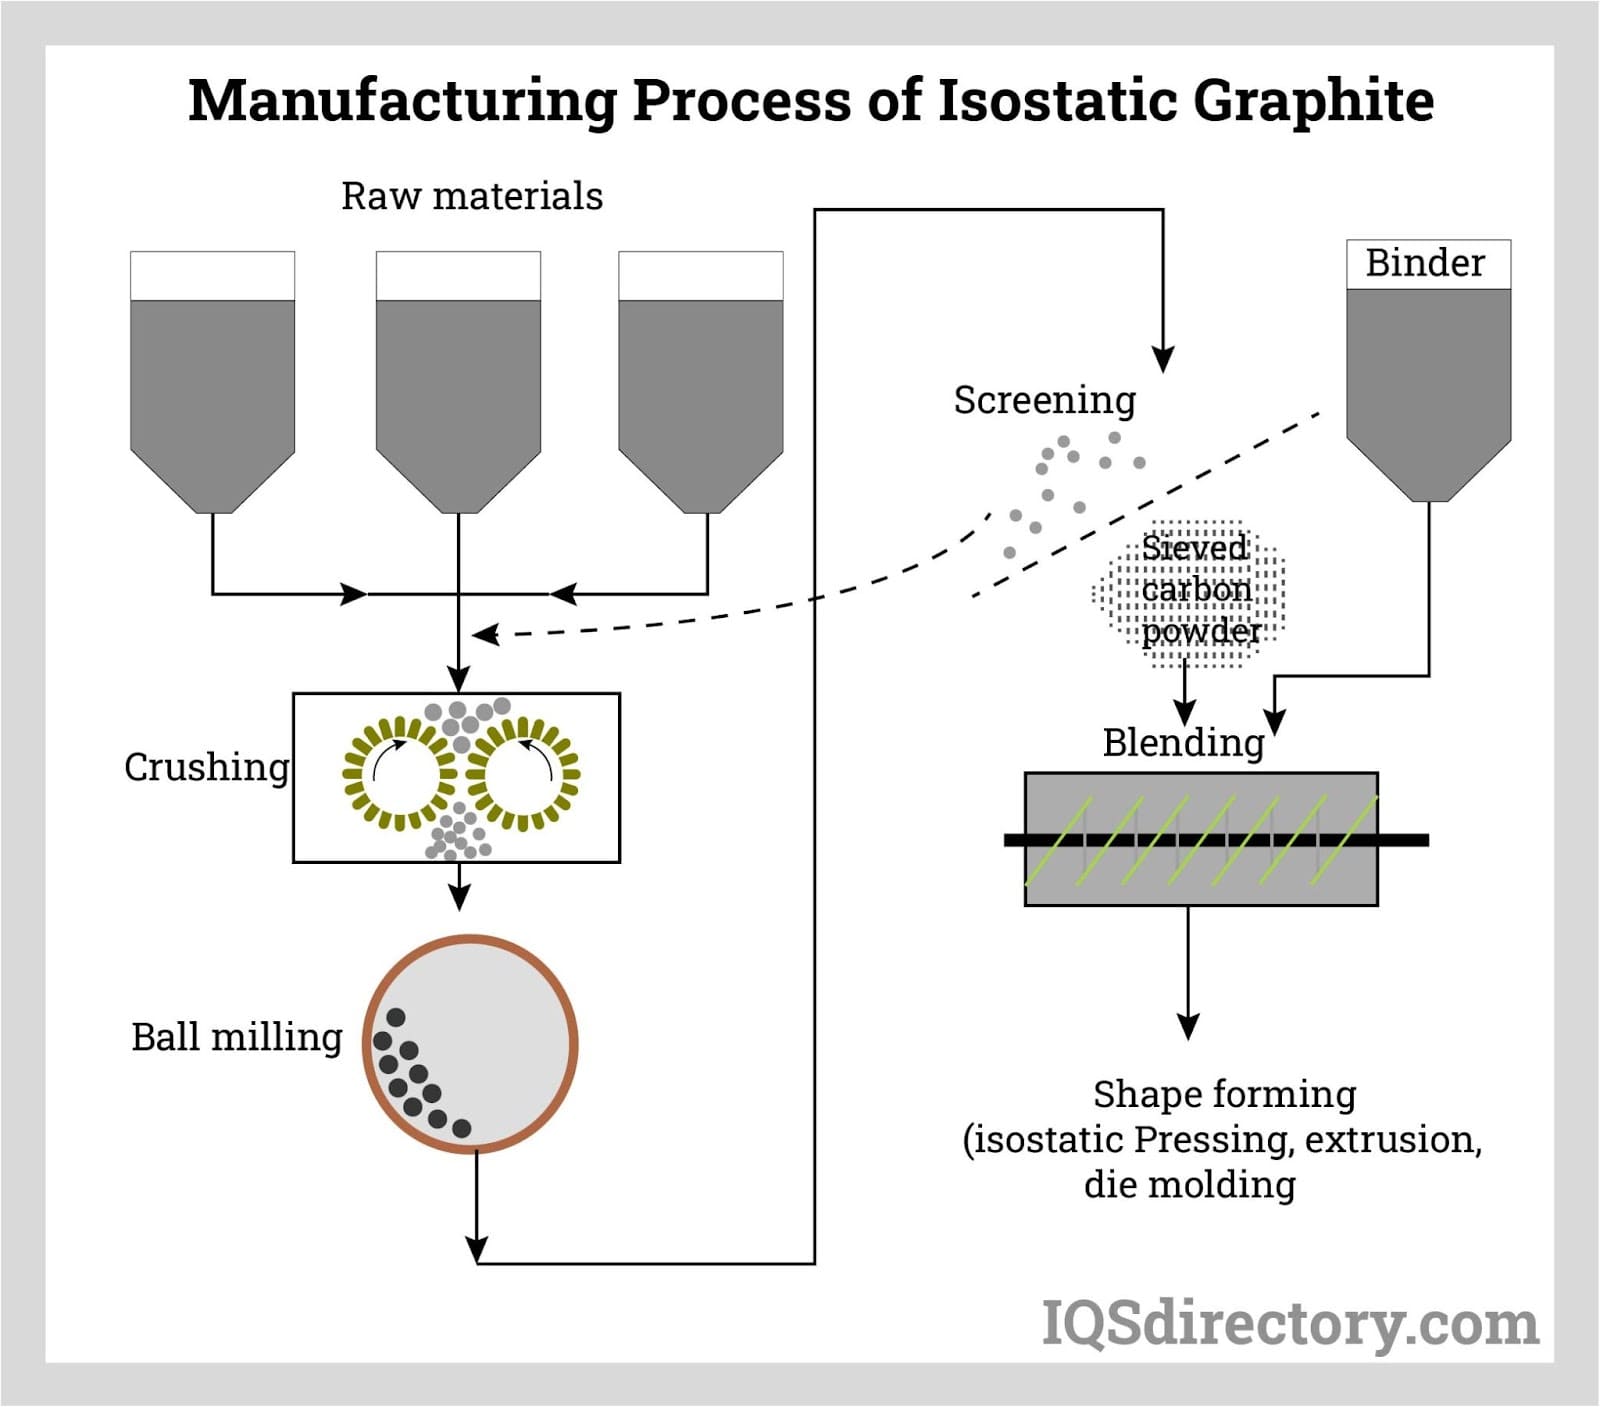 Manufacturing Process of Isostatic Graphite